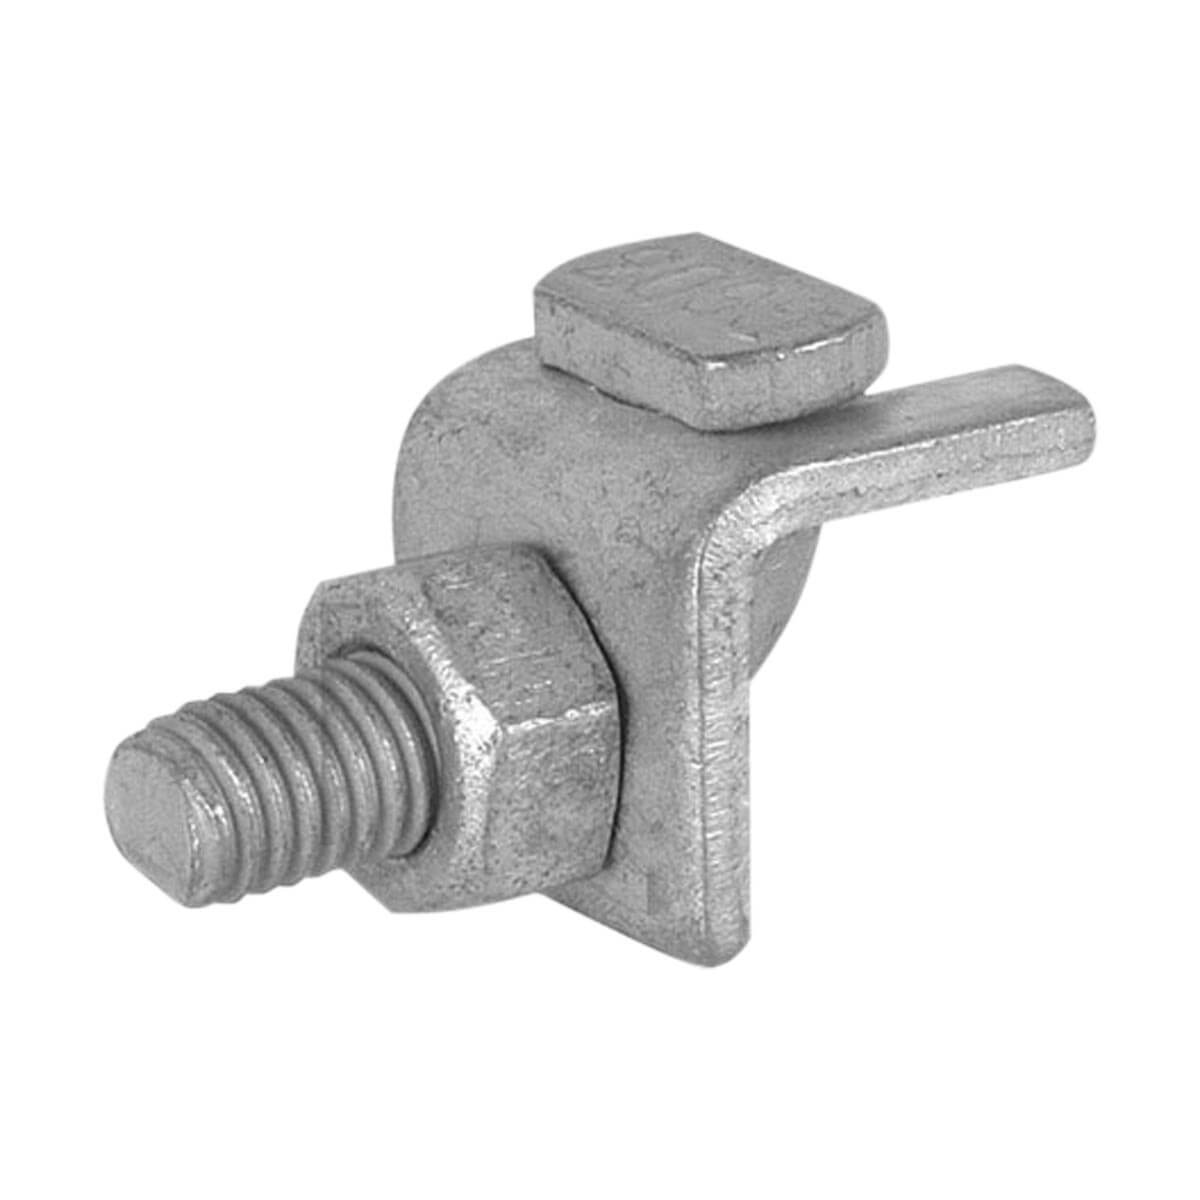 L-Style Joint Clamp - 10 pack